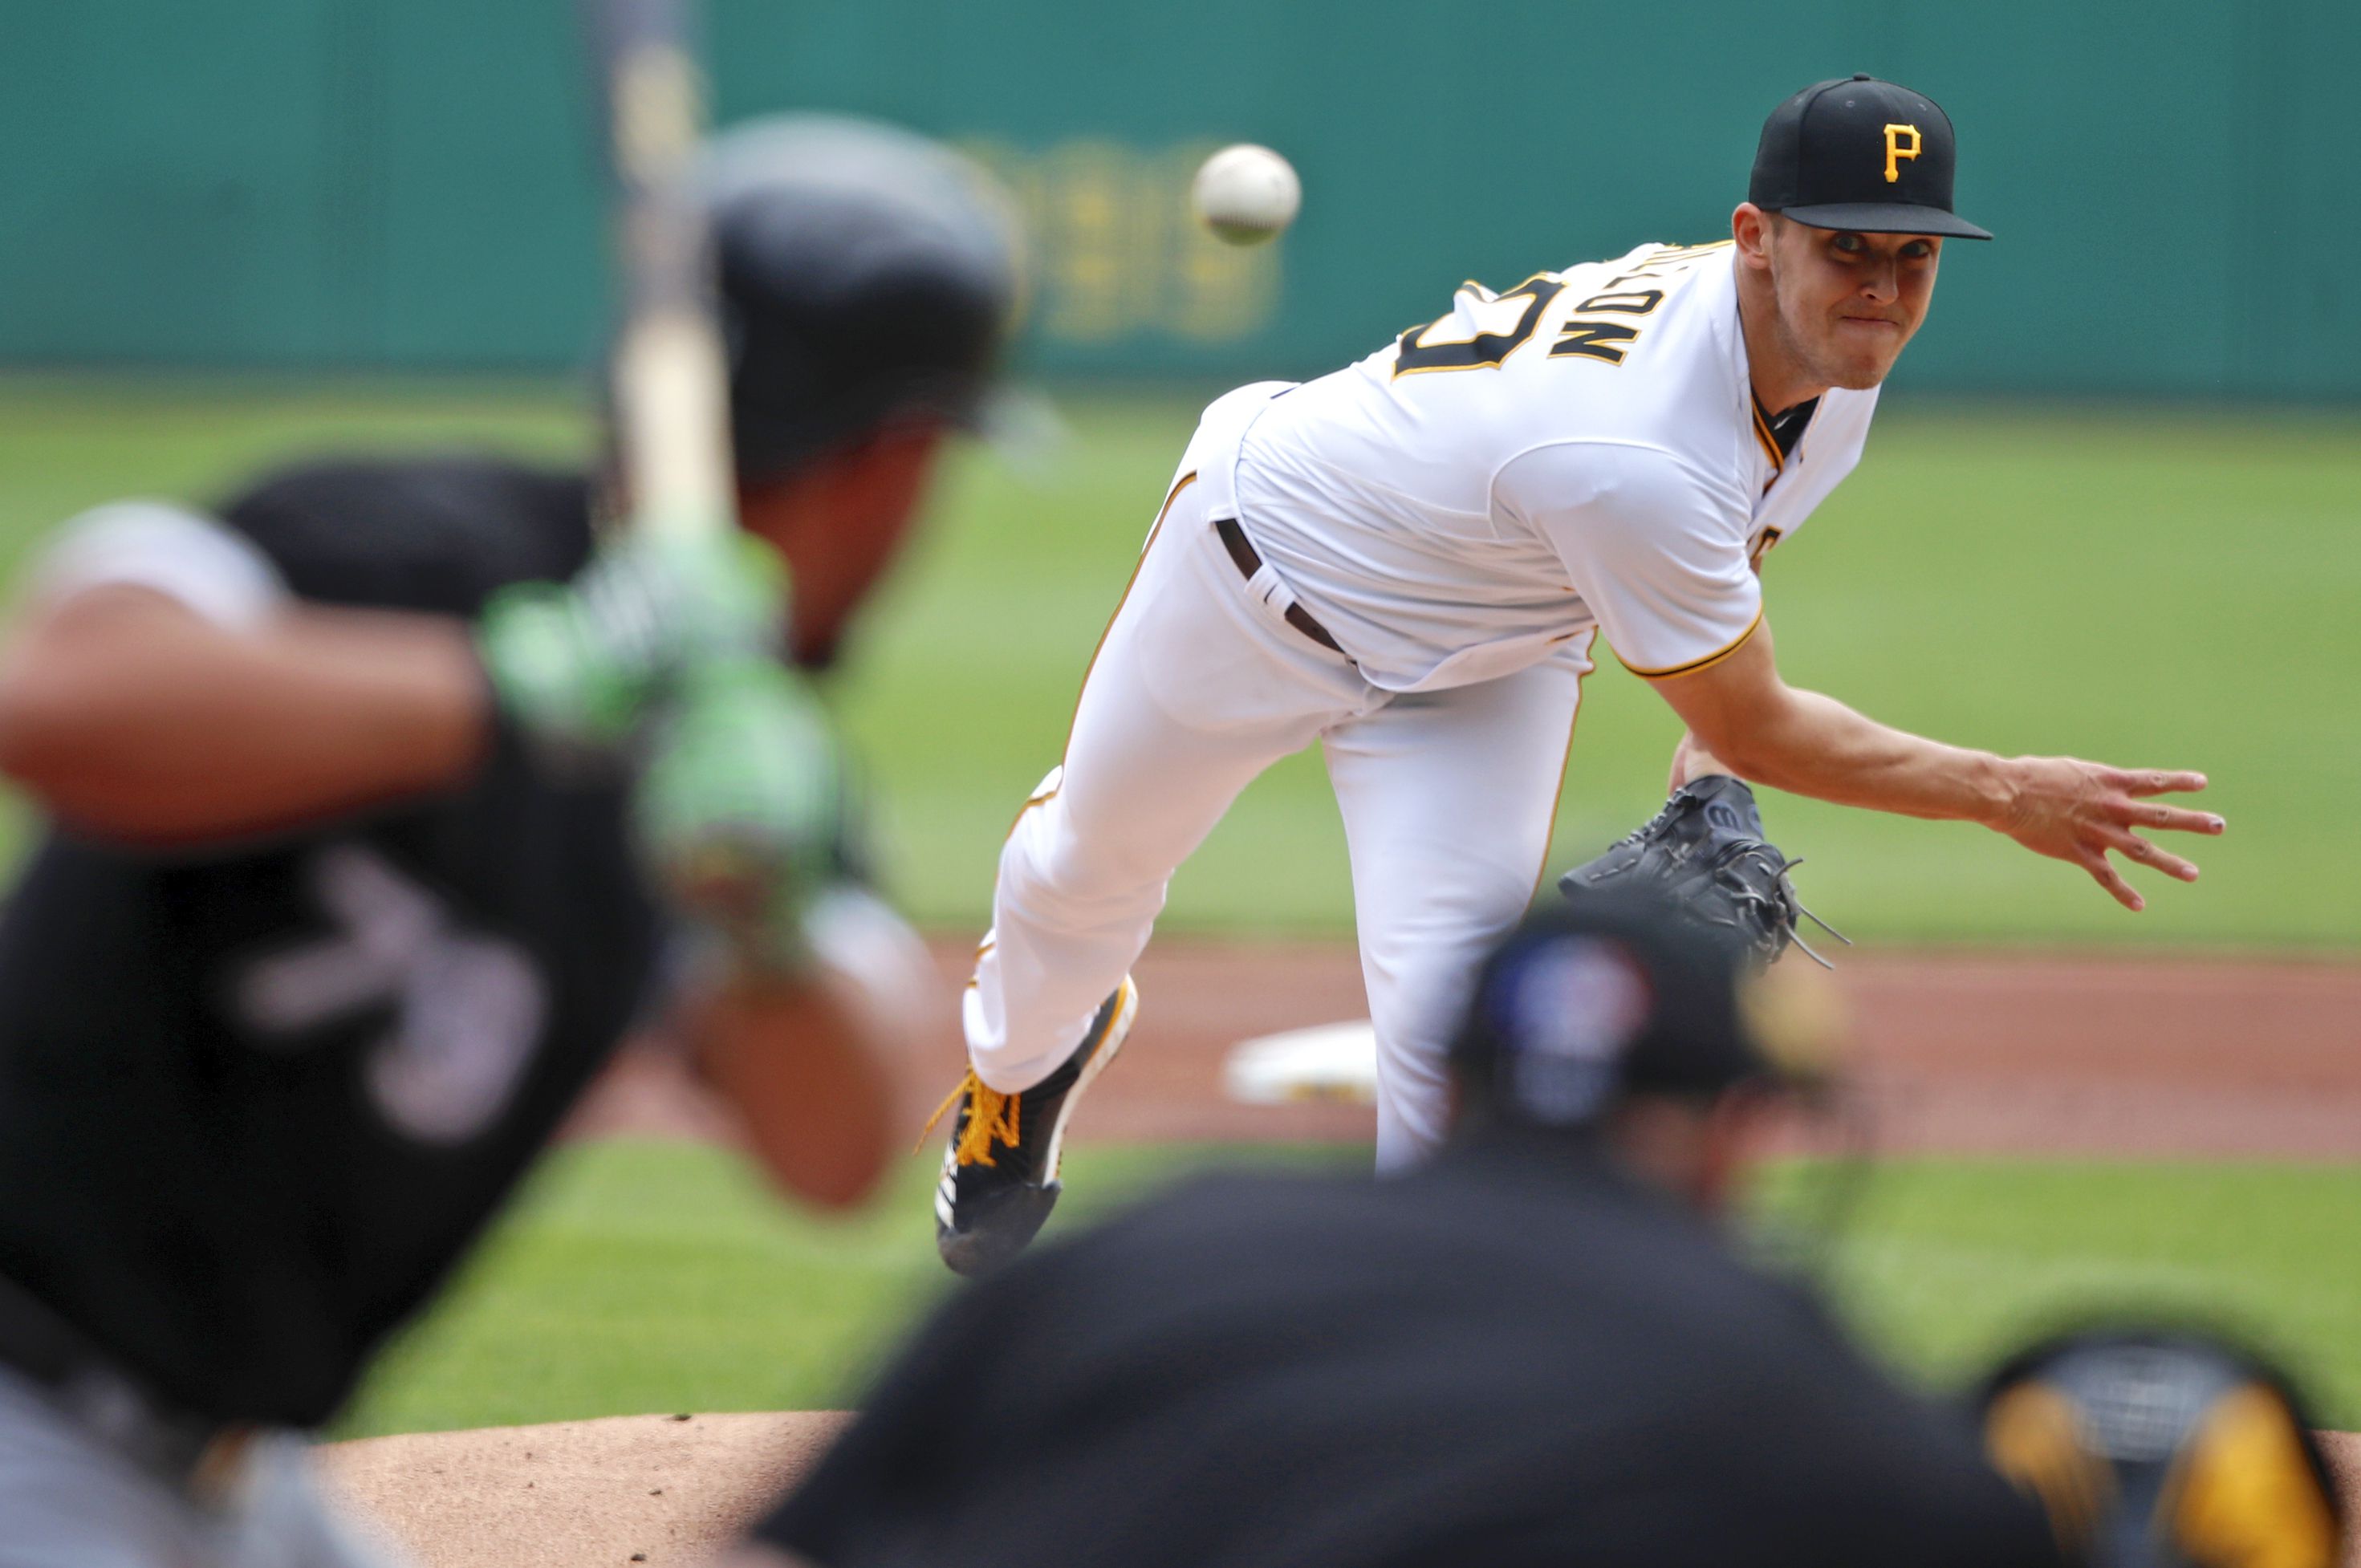 Jameson Taillon: What kind of cancer did the Yankees pitcher recover from?